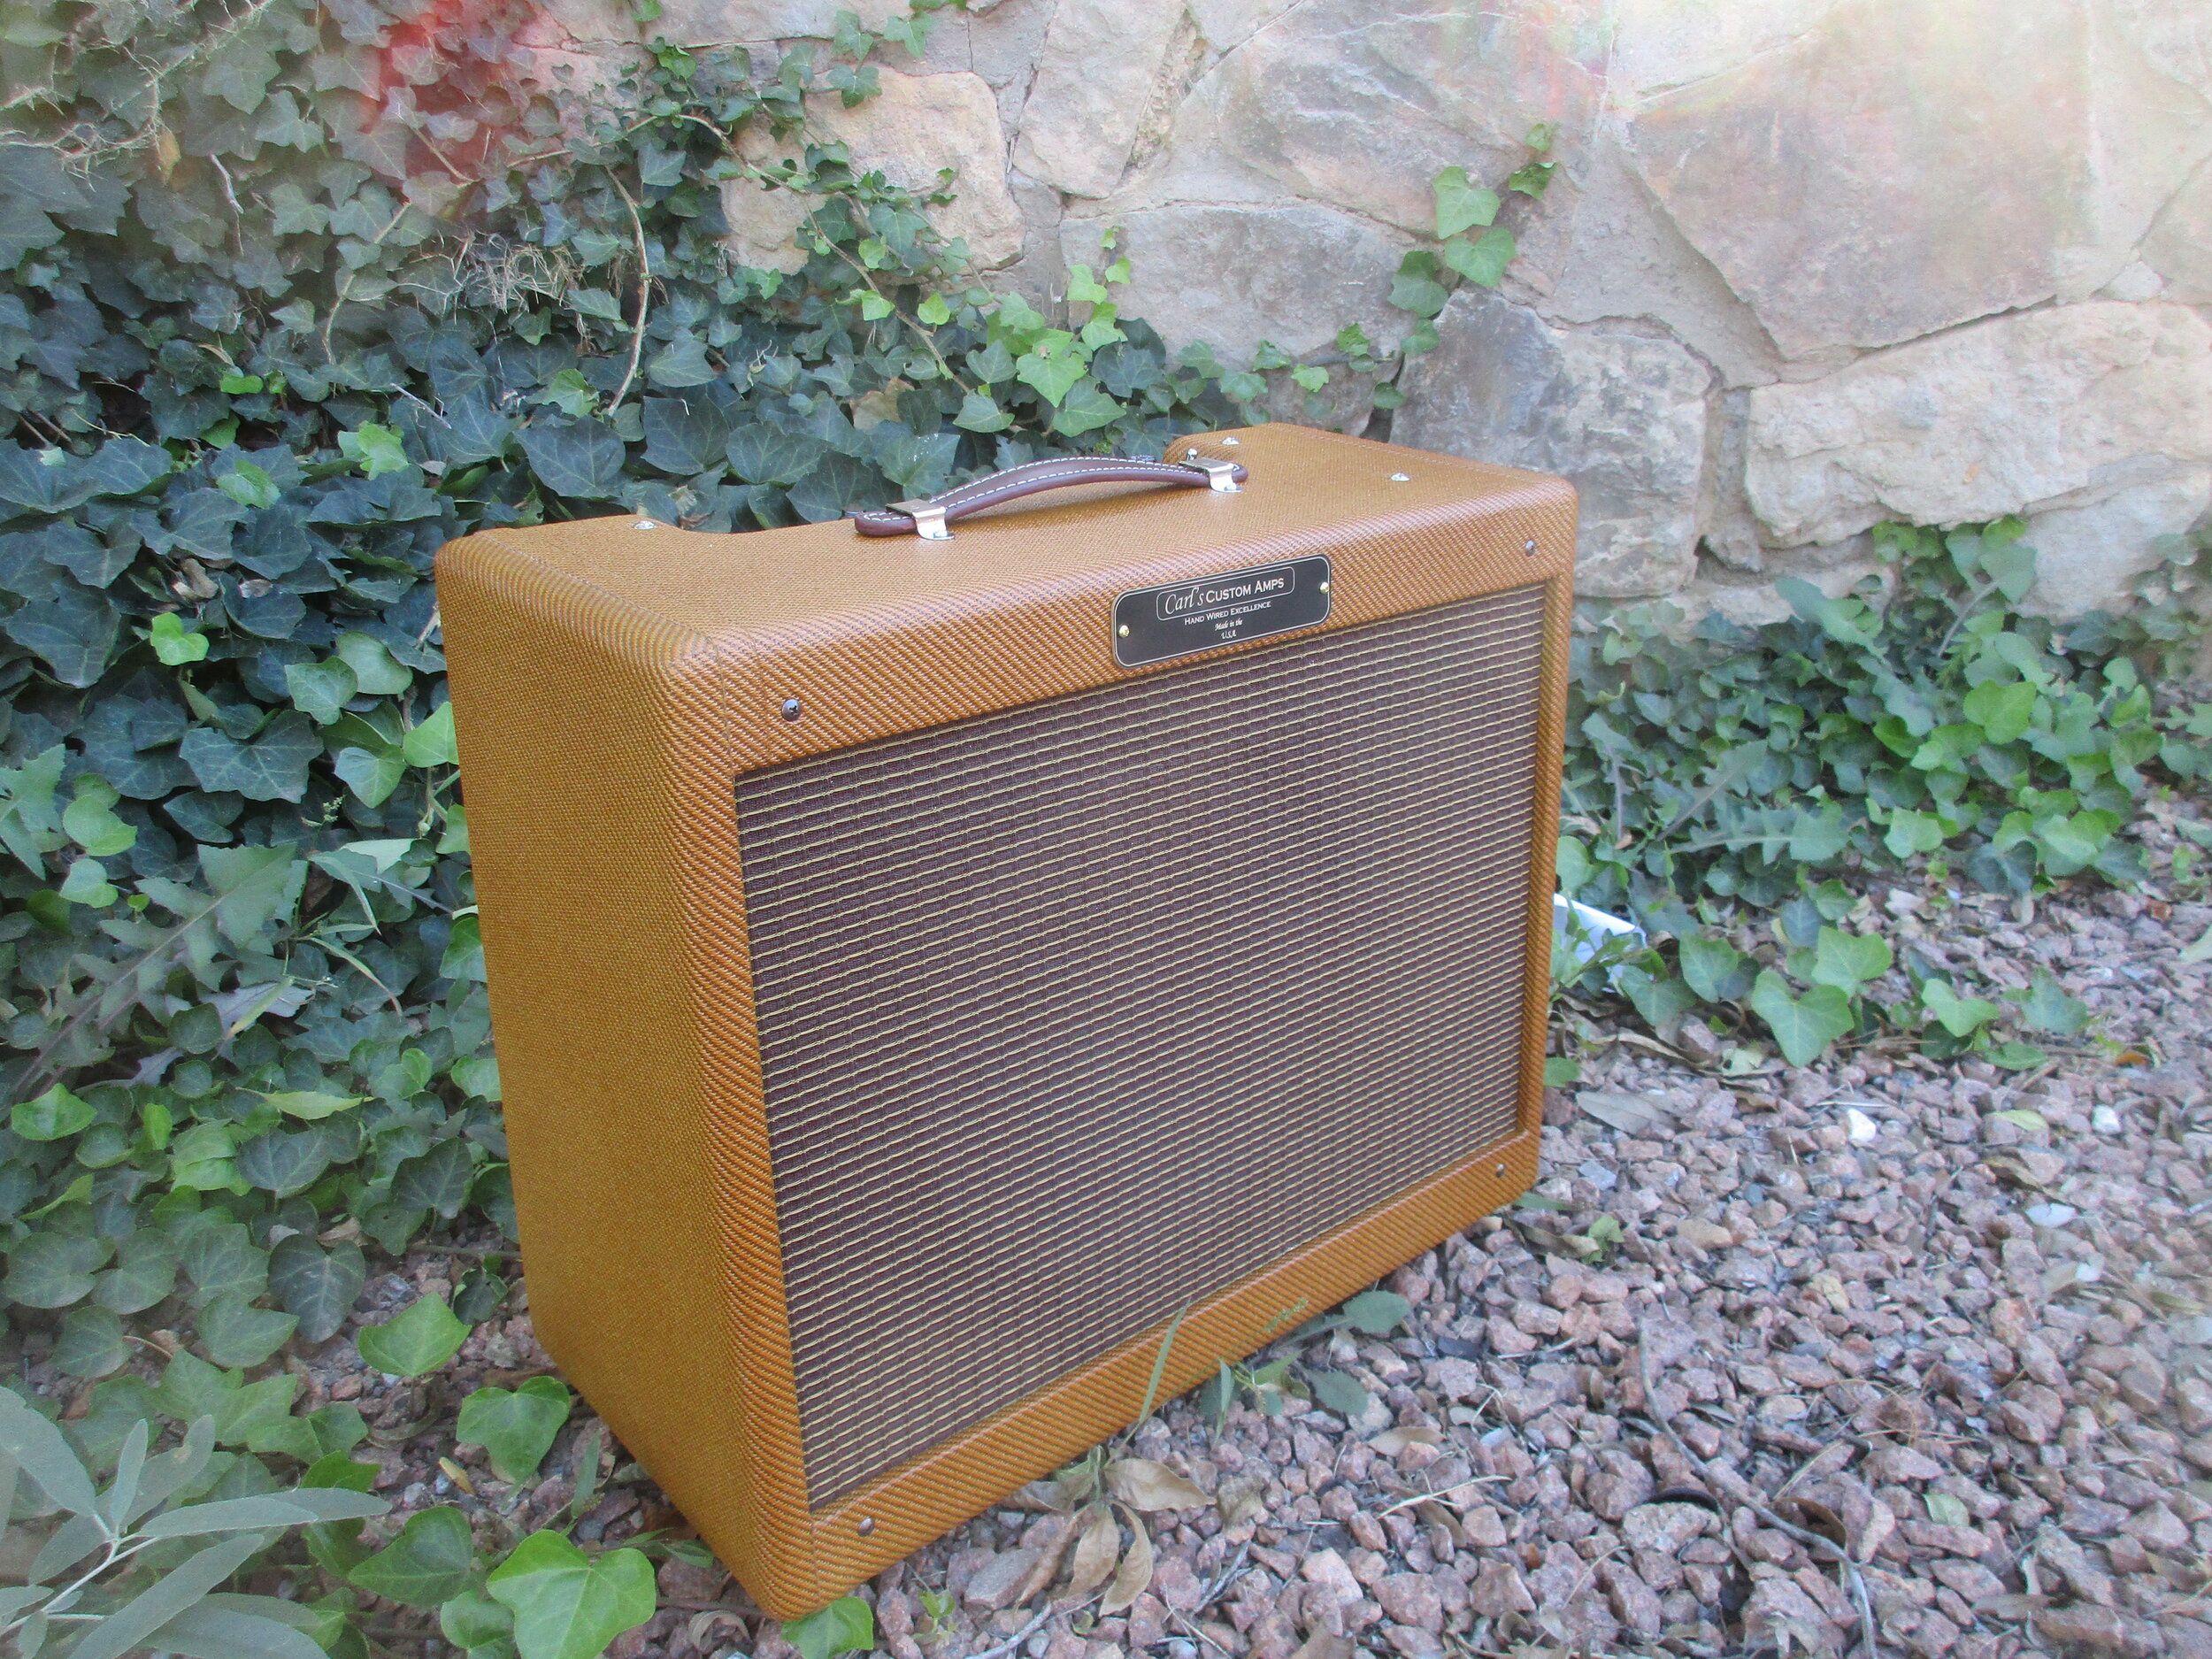 FENDER 5e3 TWEED DELUXE AMP 1 MICA CAPACITOR .0005 MFD NOS CORNELL-DUBILIER 